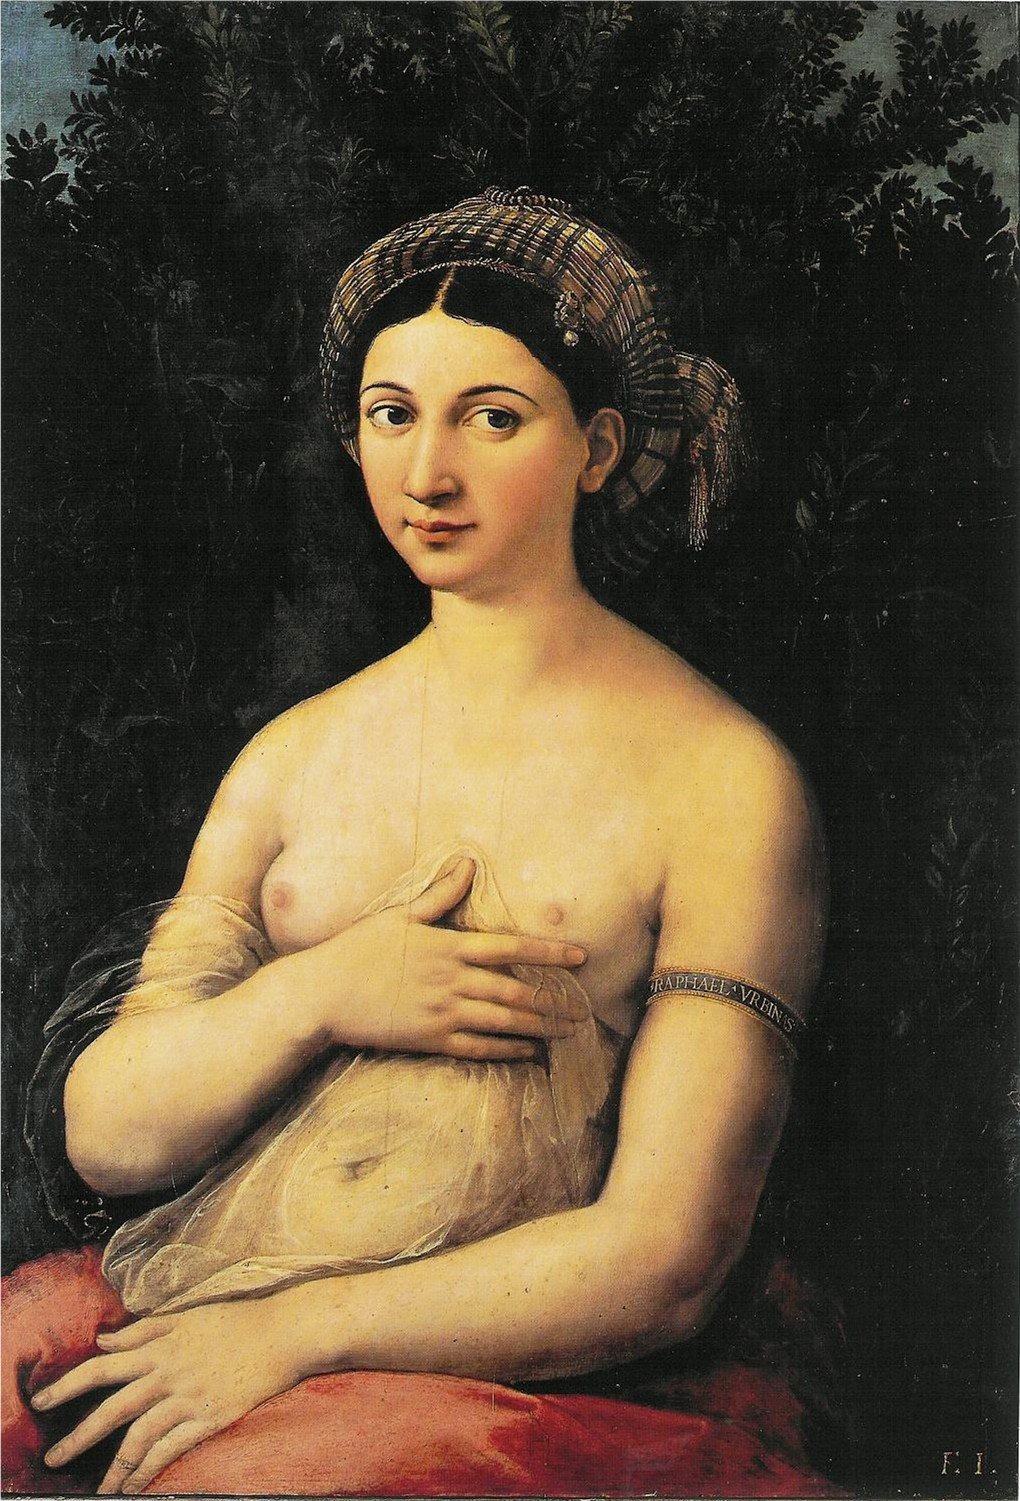 Portrait_of_a_Nude_WomanLa_Fornarinac1518Palazzo_Barberin.jpg